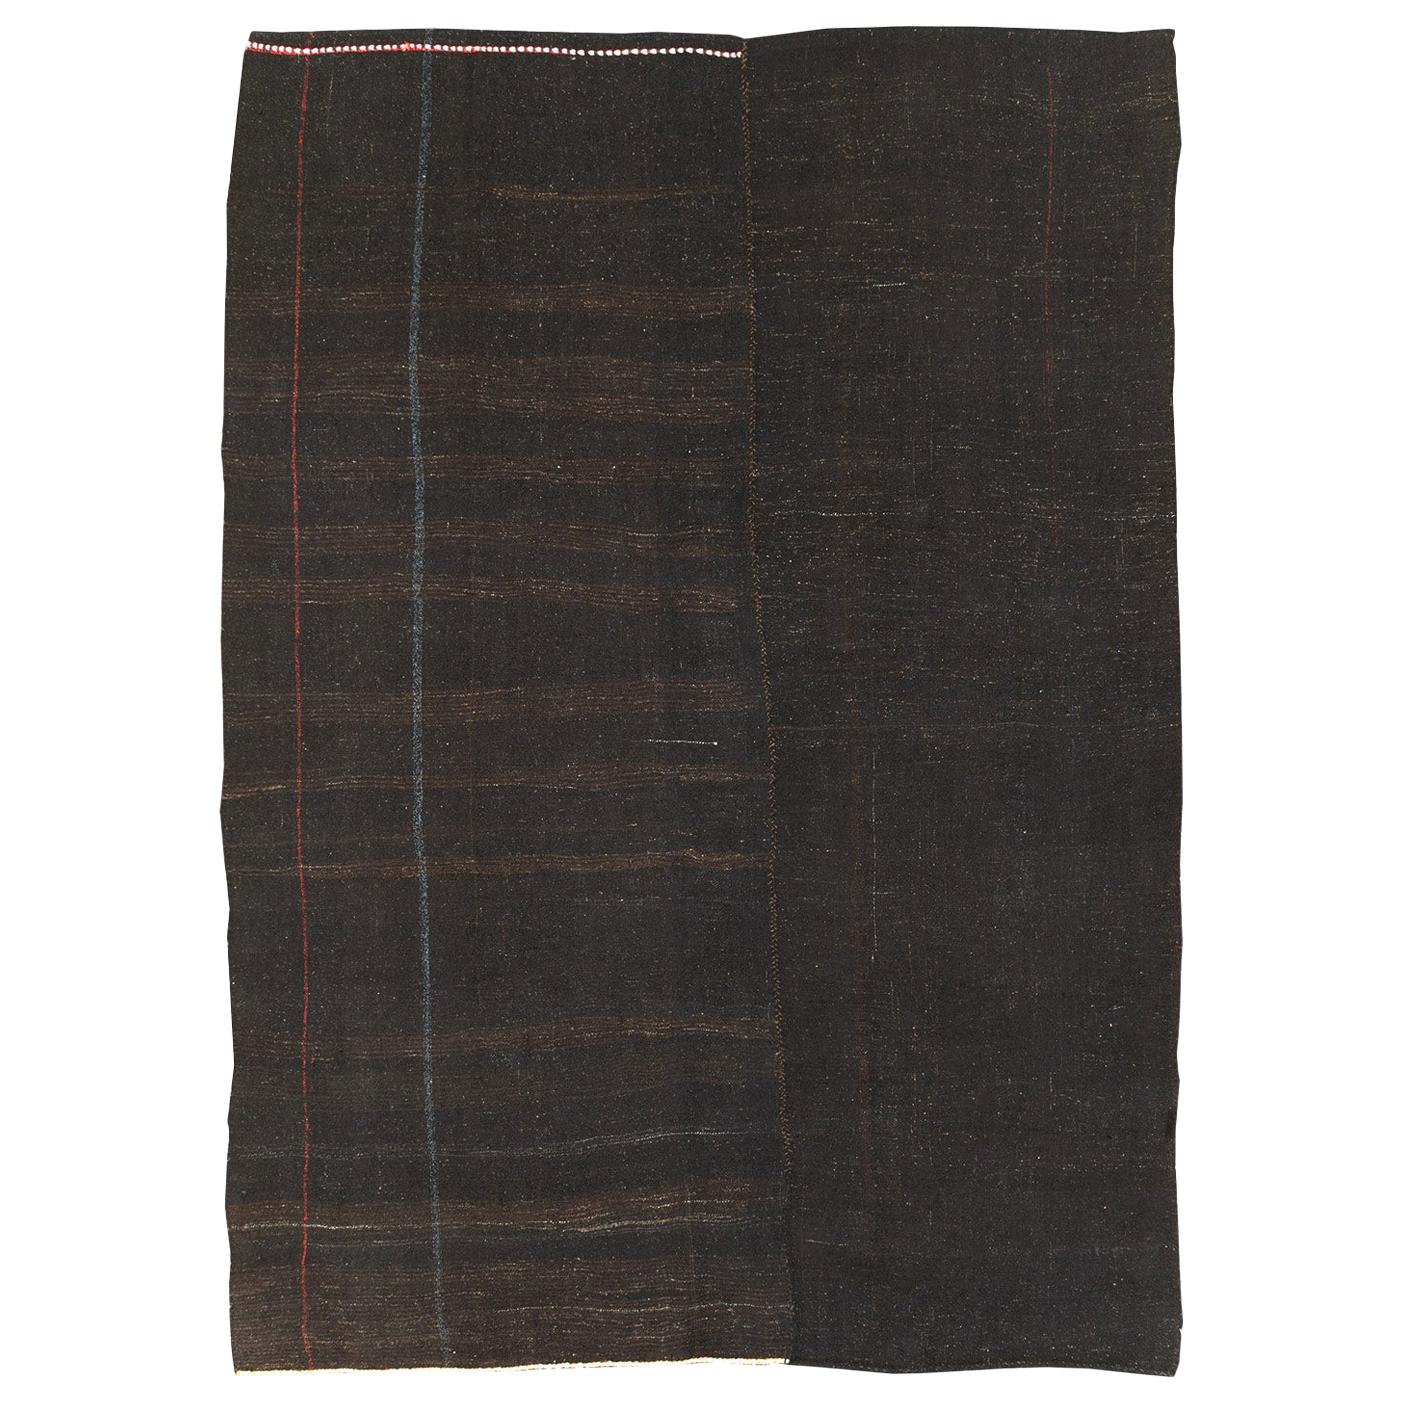 Mid-20th Century Turkish Tribal Kilim Room Size Carpet in Dark Brown and Black For Sale